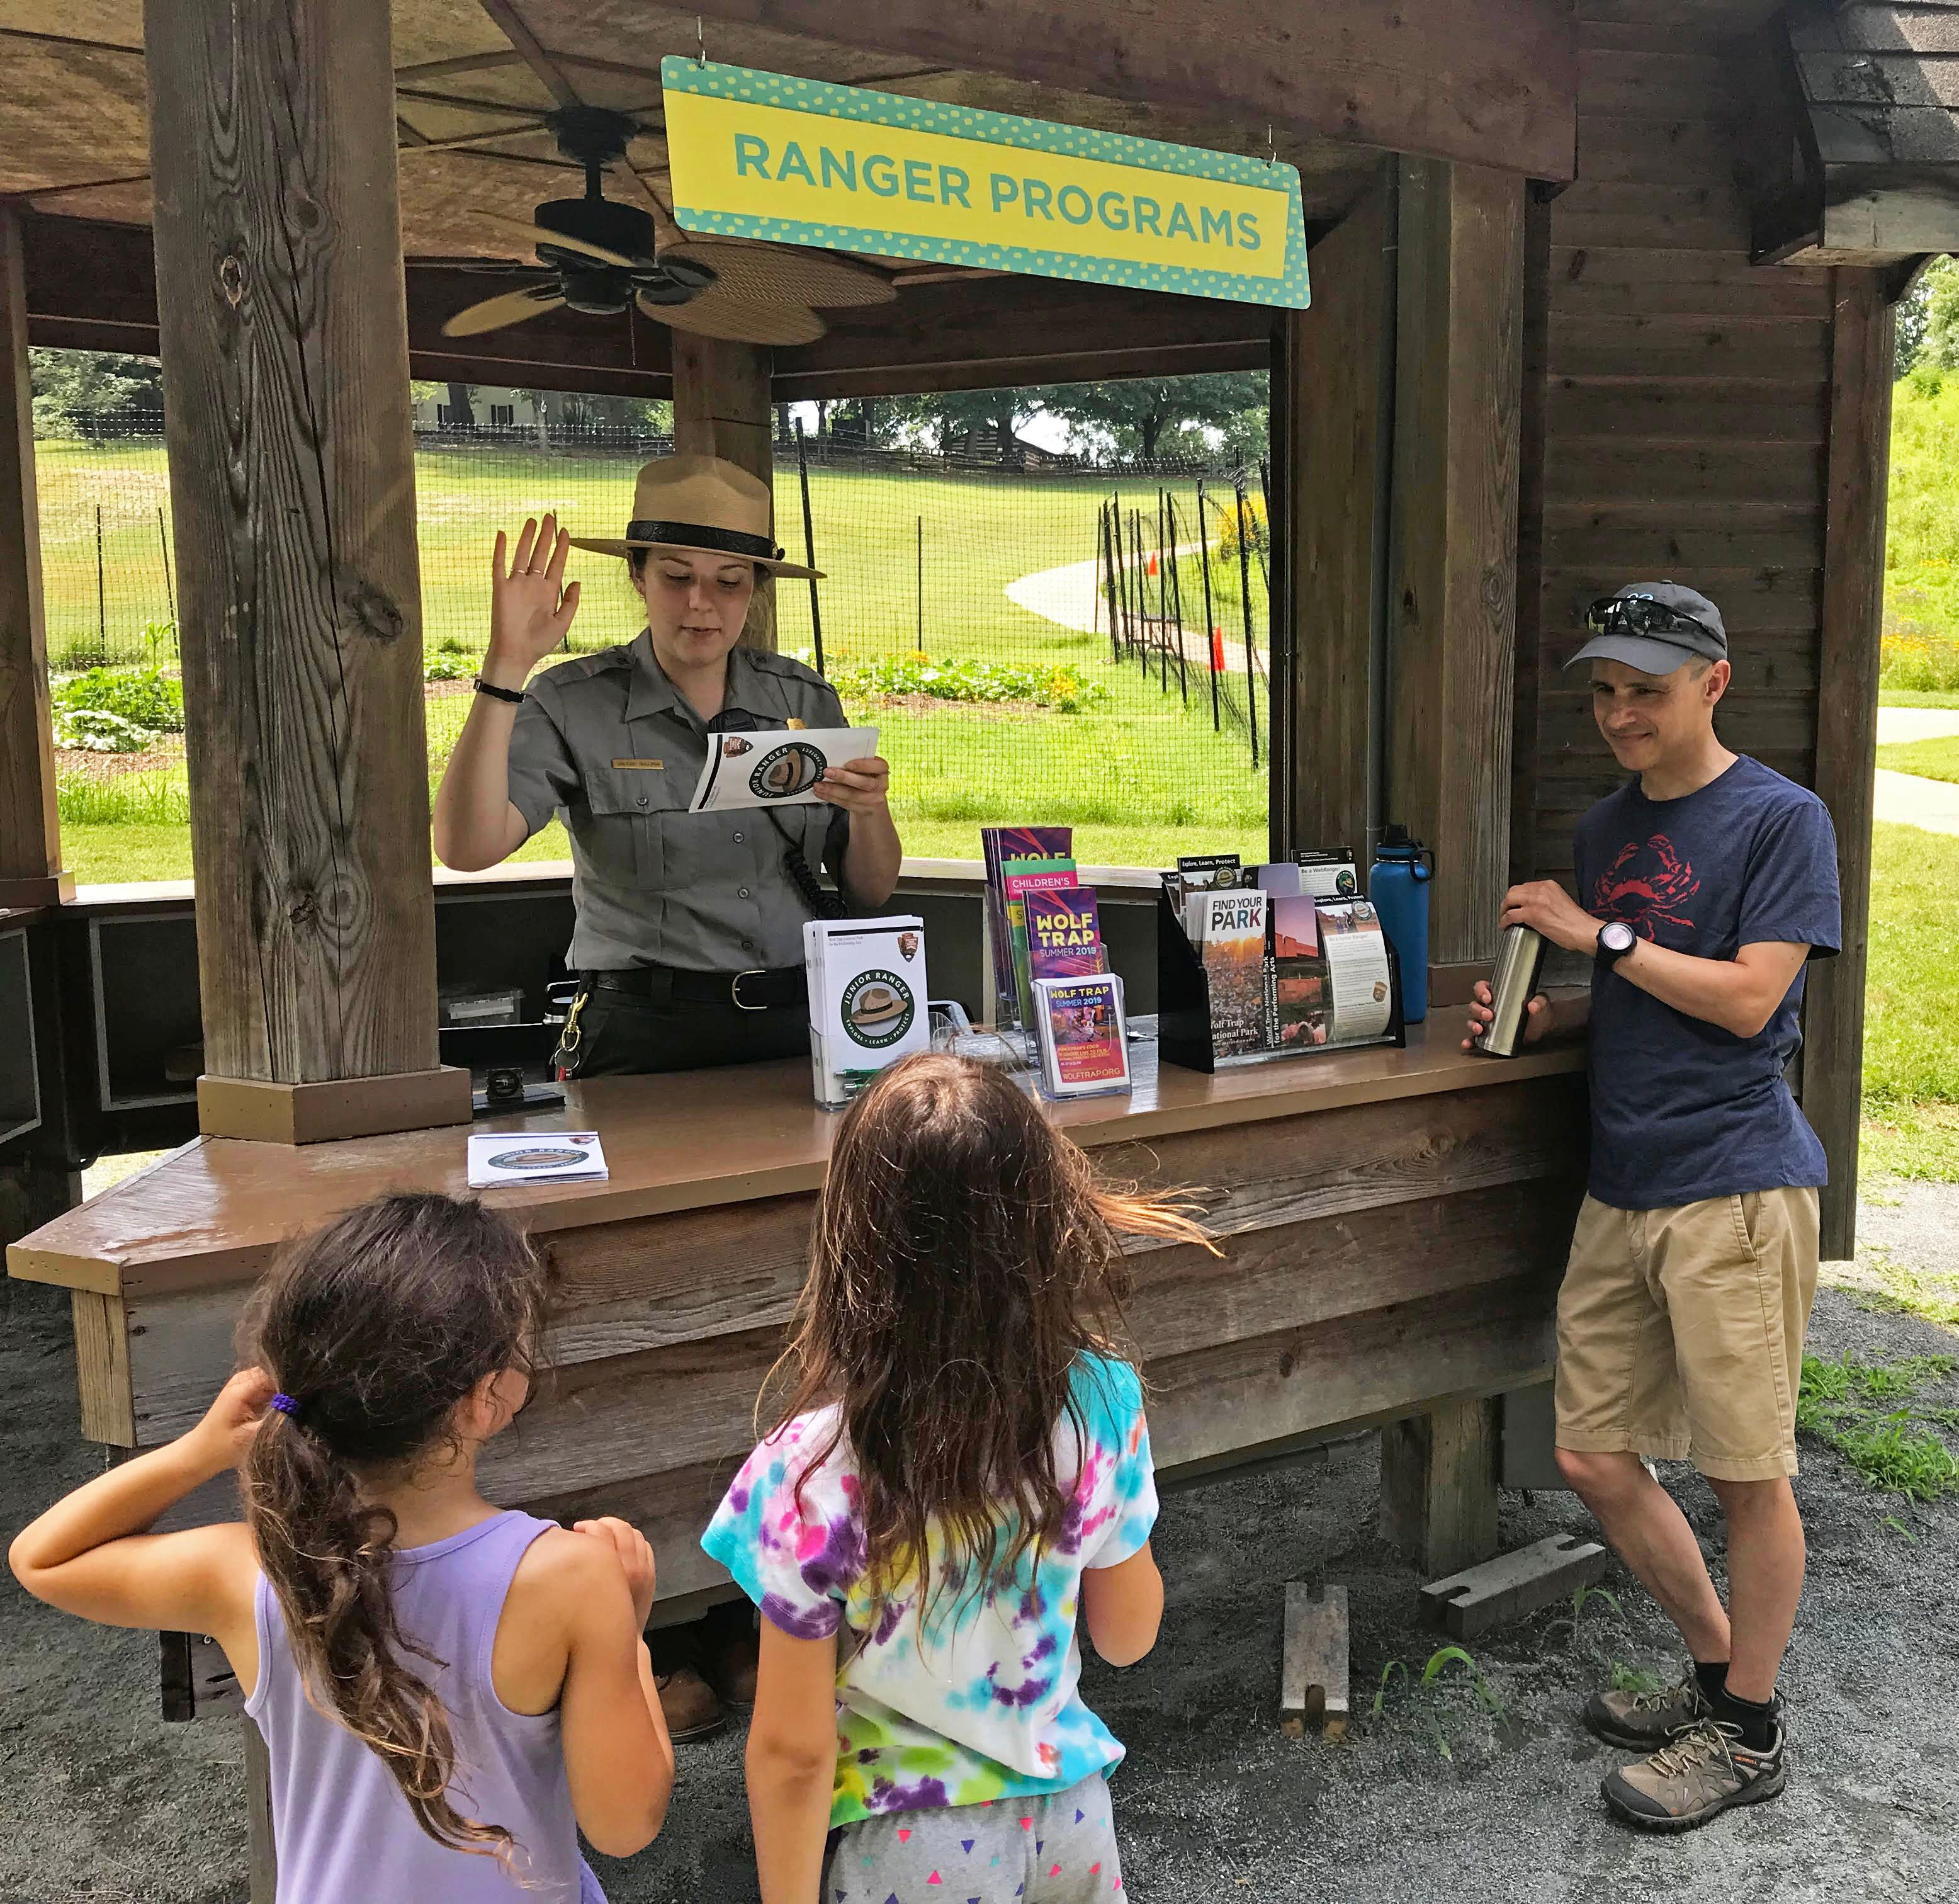 A ranger swears in two new Jr. Rangers during Jr. Ranger Day activities at the park.